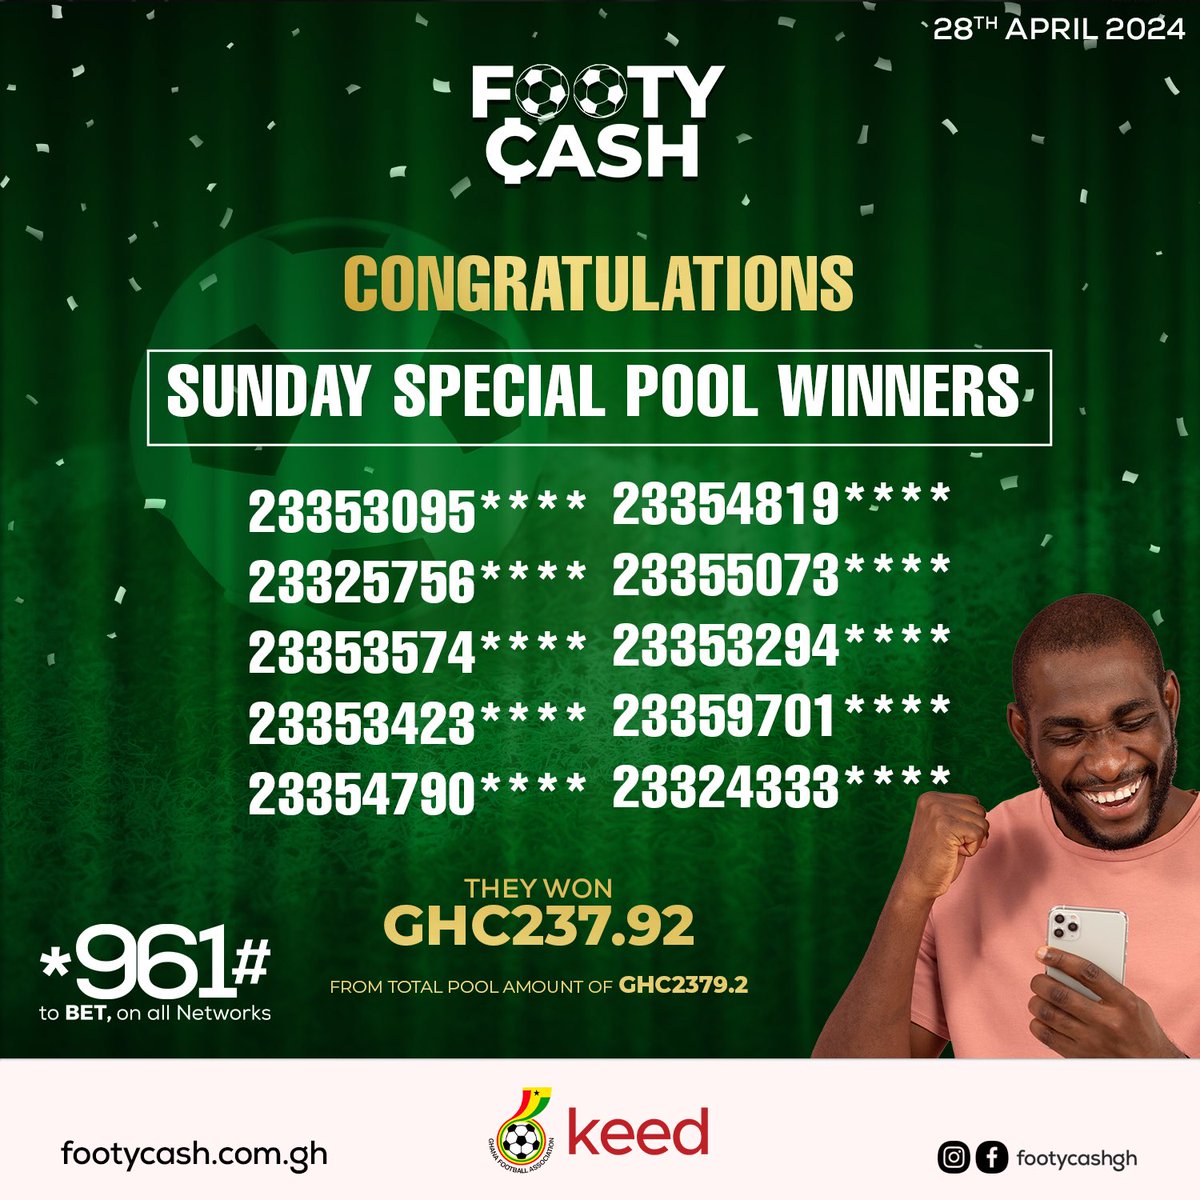 Our Sunday Special Pool winners are in! Check if you’re one of them! ⚽️

Want to join the fun and potentially win big? Head to footycash.com.gh and start playing today!

#MatchweekPool #WinningMoments #FootballFun #FootyCash #football #sports